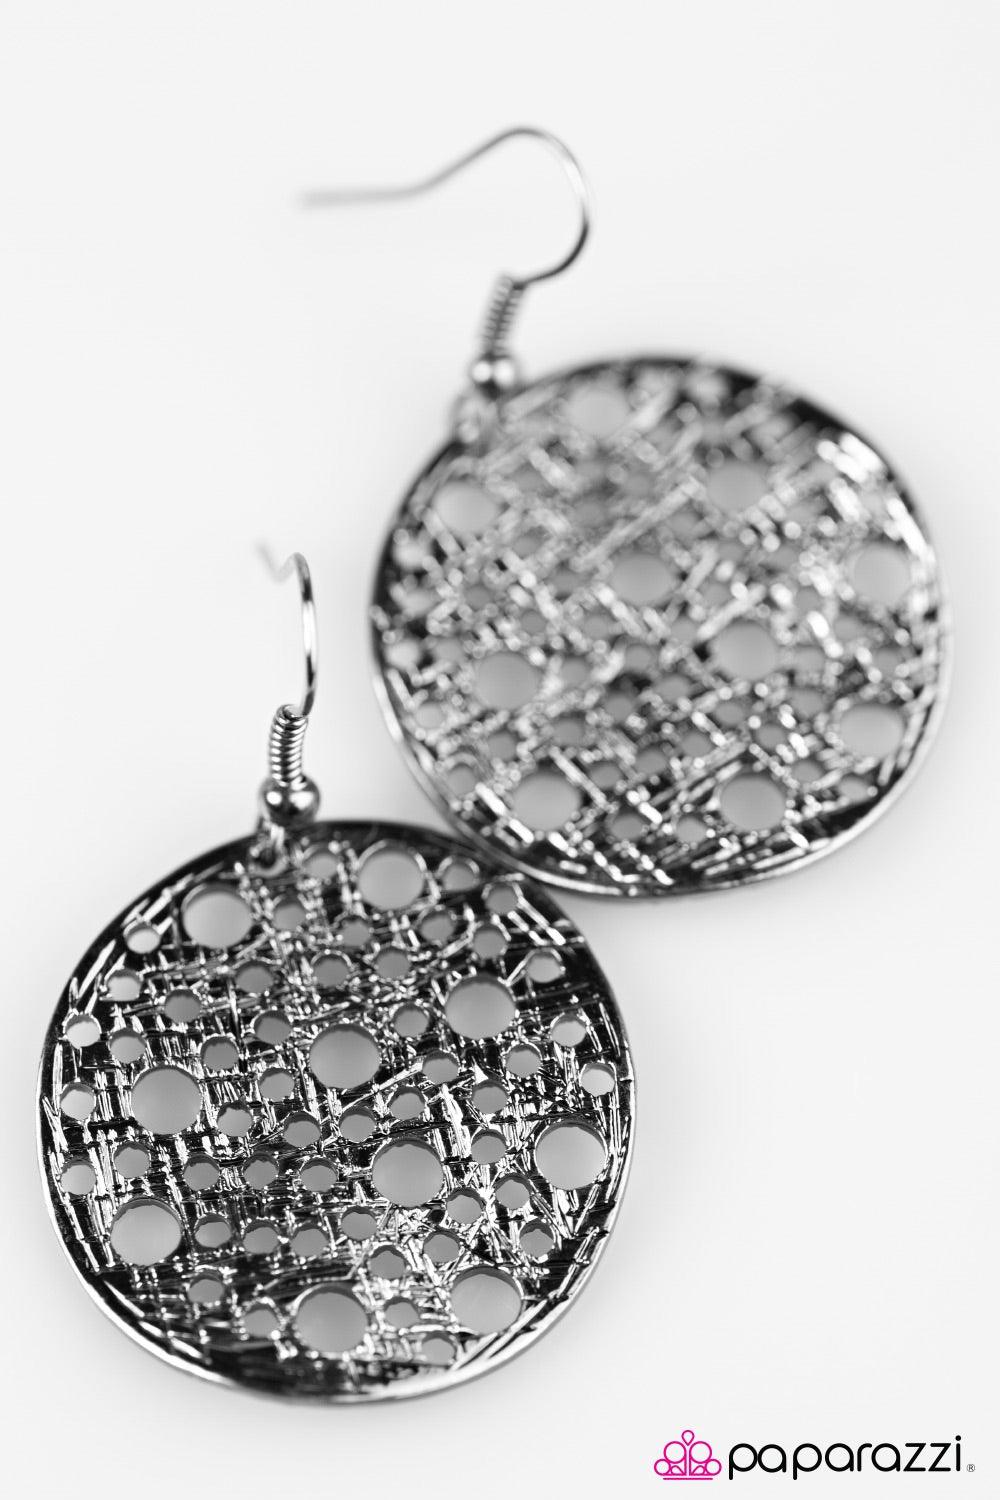 Paparazzi Accessories The HOLE Wide World - Black Brushed in a shiny shimmer, a delicately hammered gunmetal disc swings from the ear. Etched in tactile textures, the gunmetal frame is accented with round holes for an airy finish. Earring attaches to a st